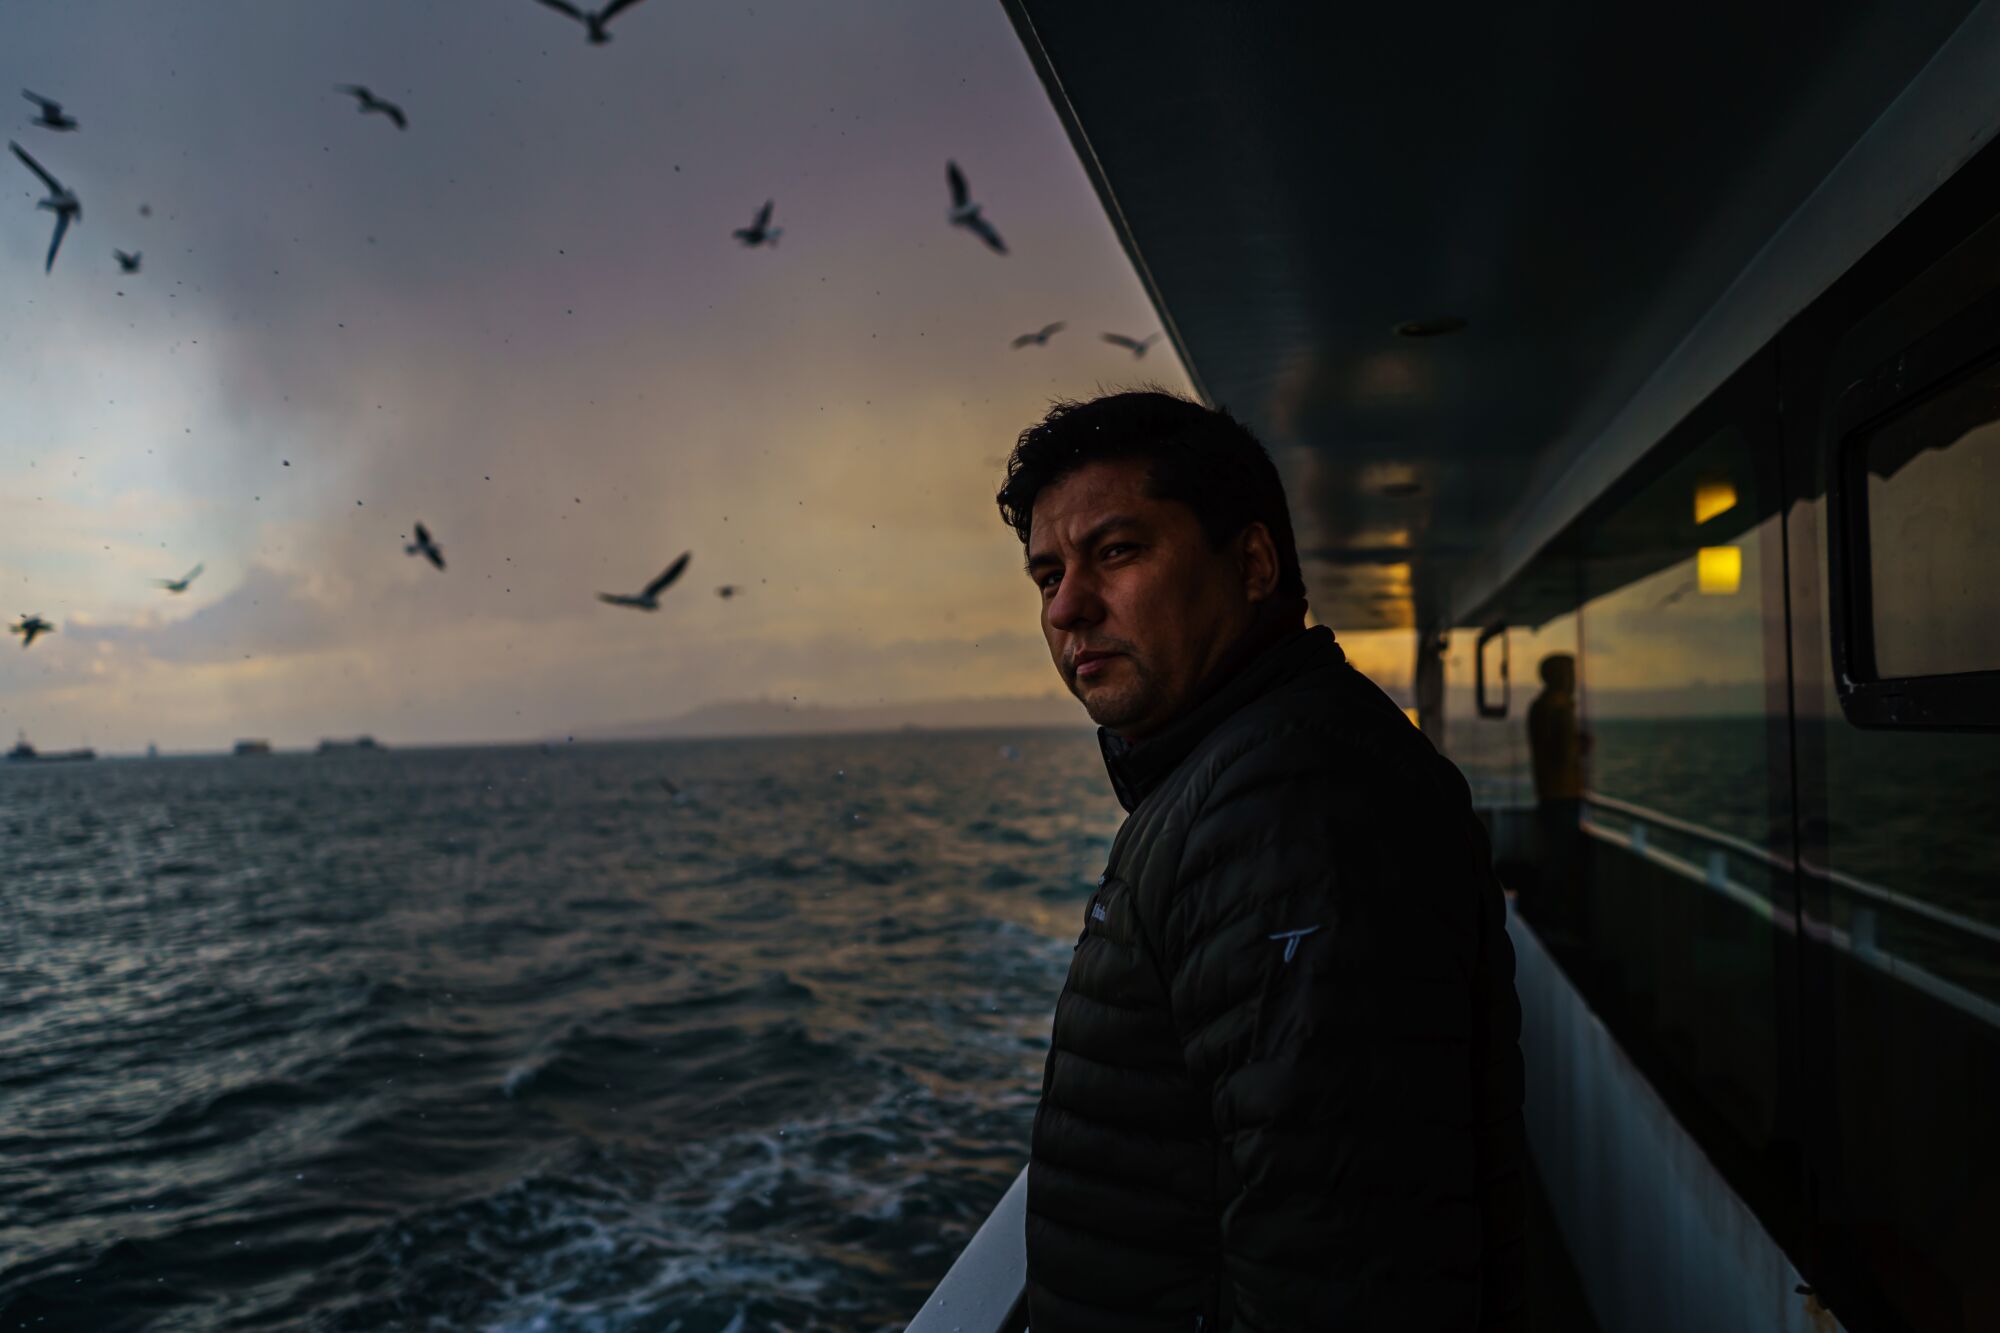 A man stands on a ferry, with the ocean and sky as a backdrop